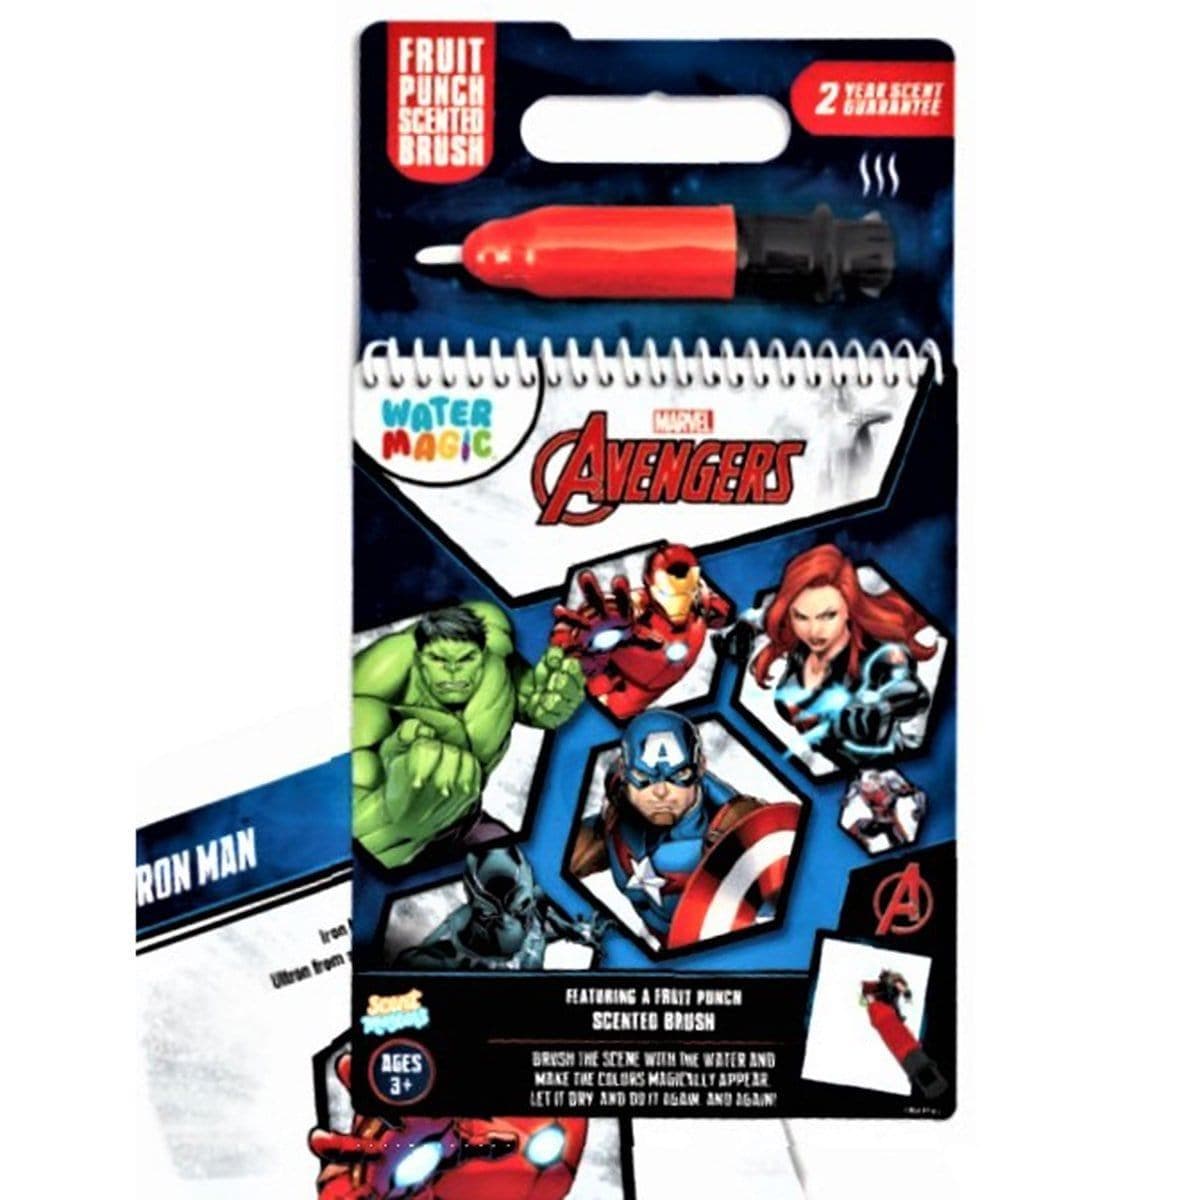 Buy Kids Birthday Avengers water magic book sold at Party Expert